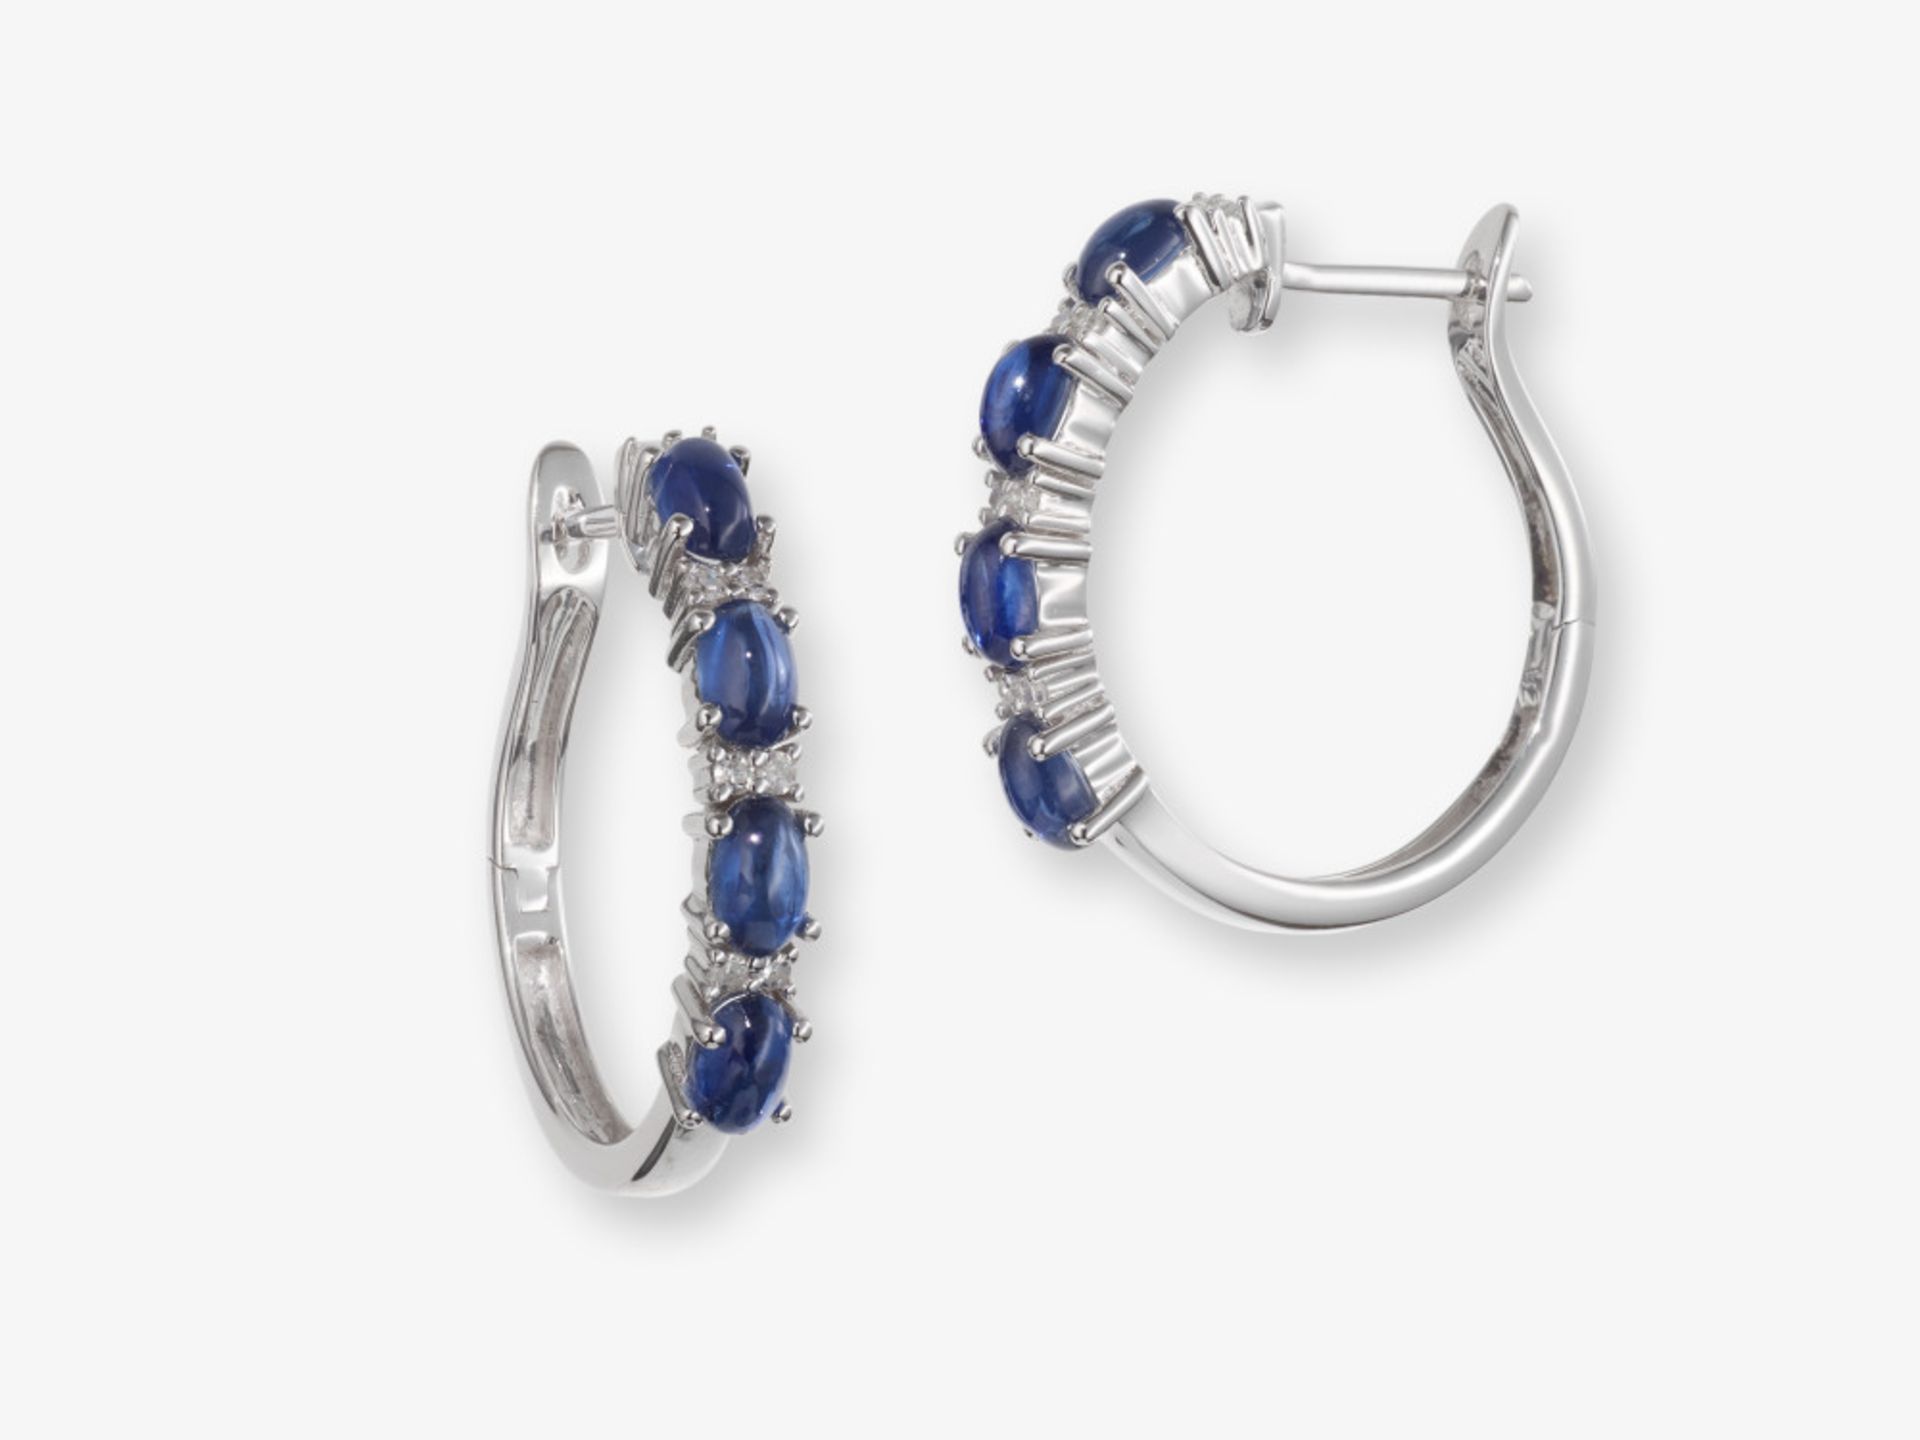 A pair of classic hoop earrings decorated with sapphires and brilliant-cut diamonds